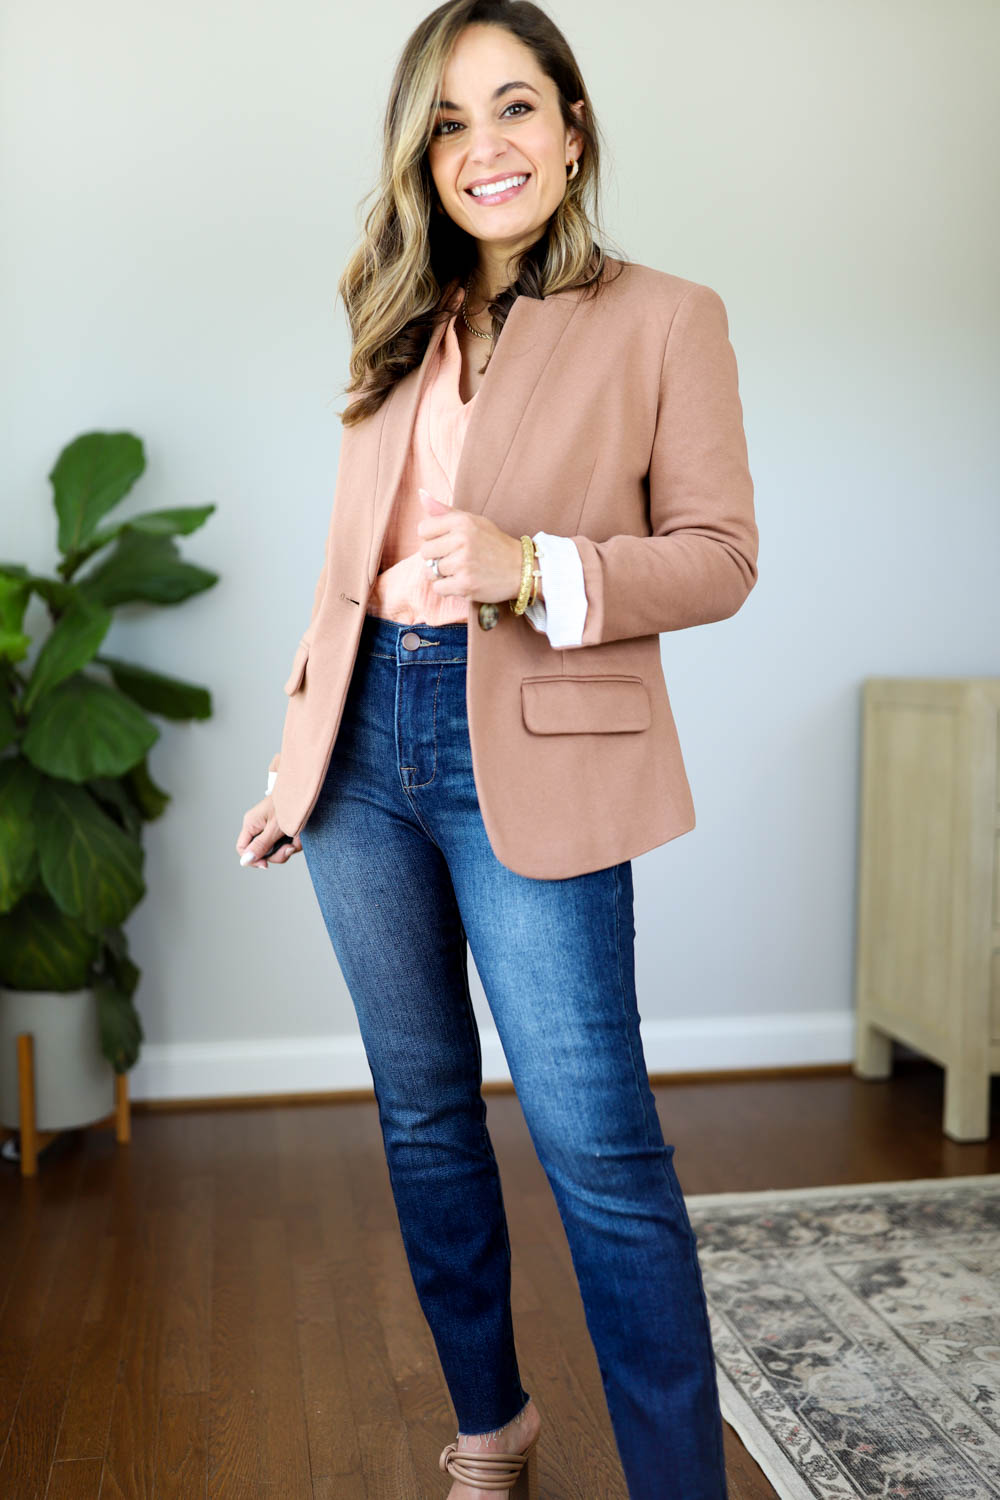 Gibsonlook try-on for petites | gibsonlook | petite friendly finds via pumps and push-ups blog 